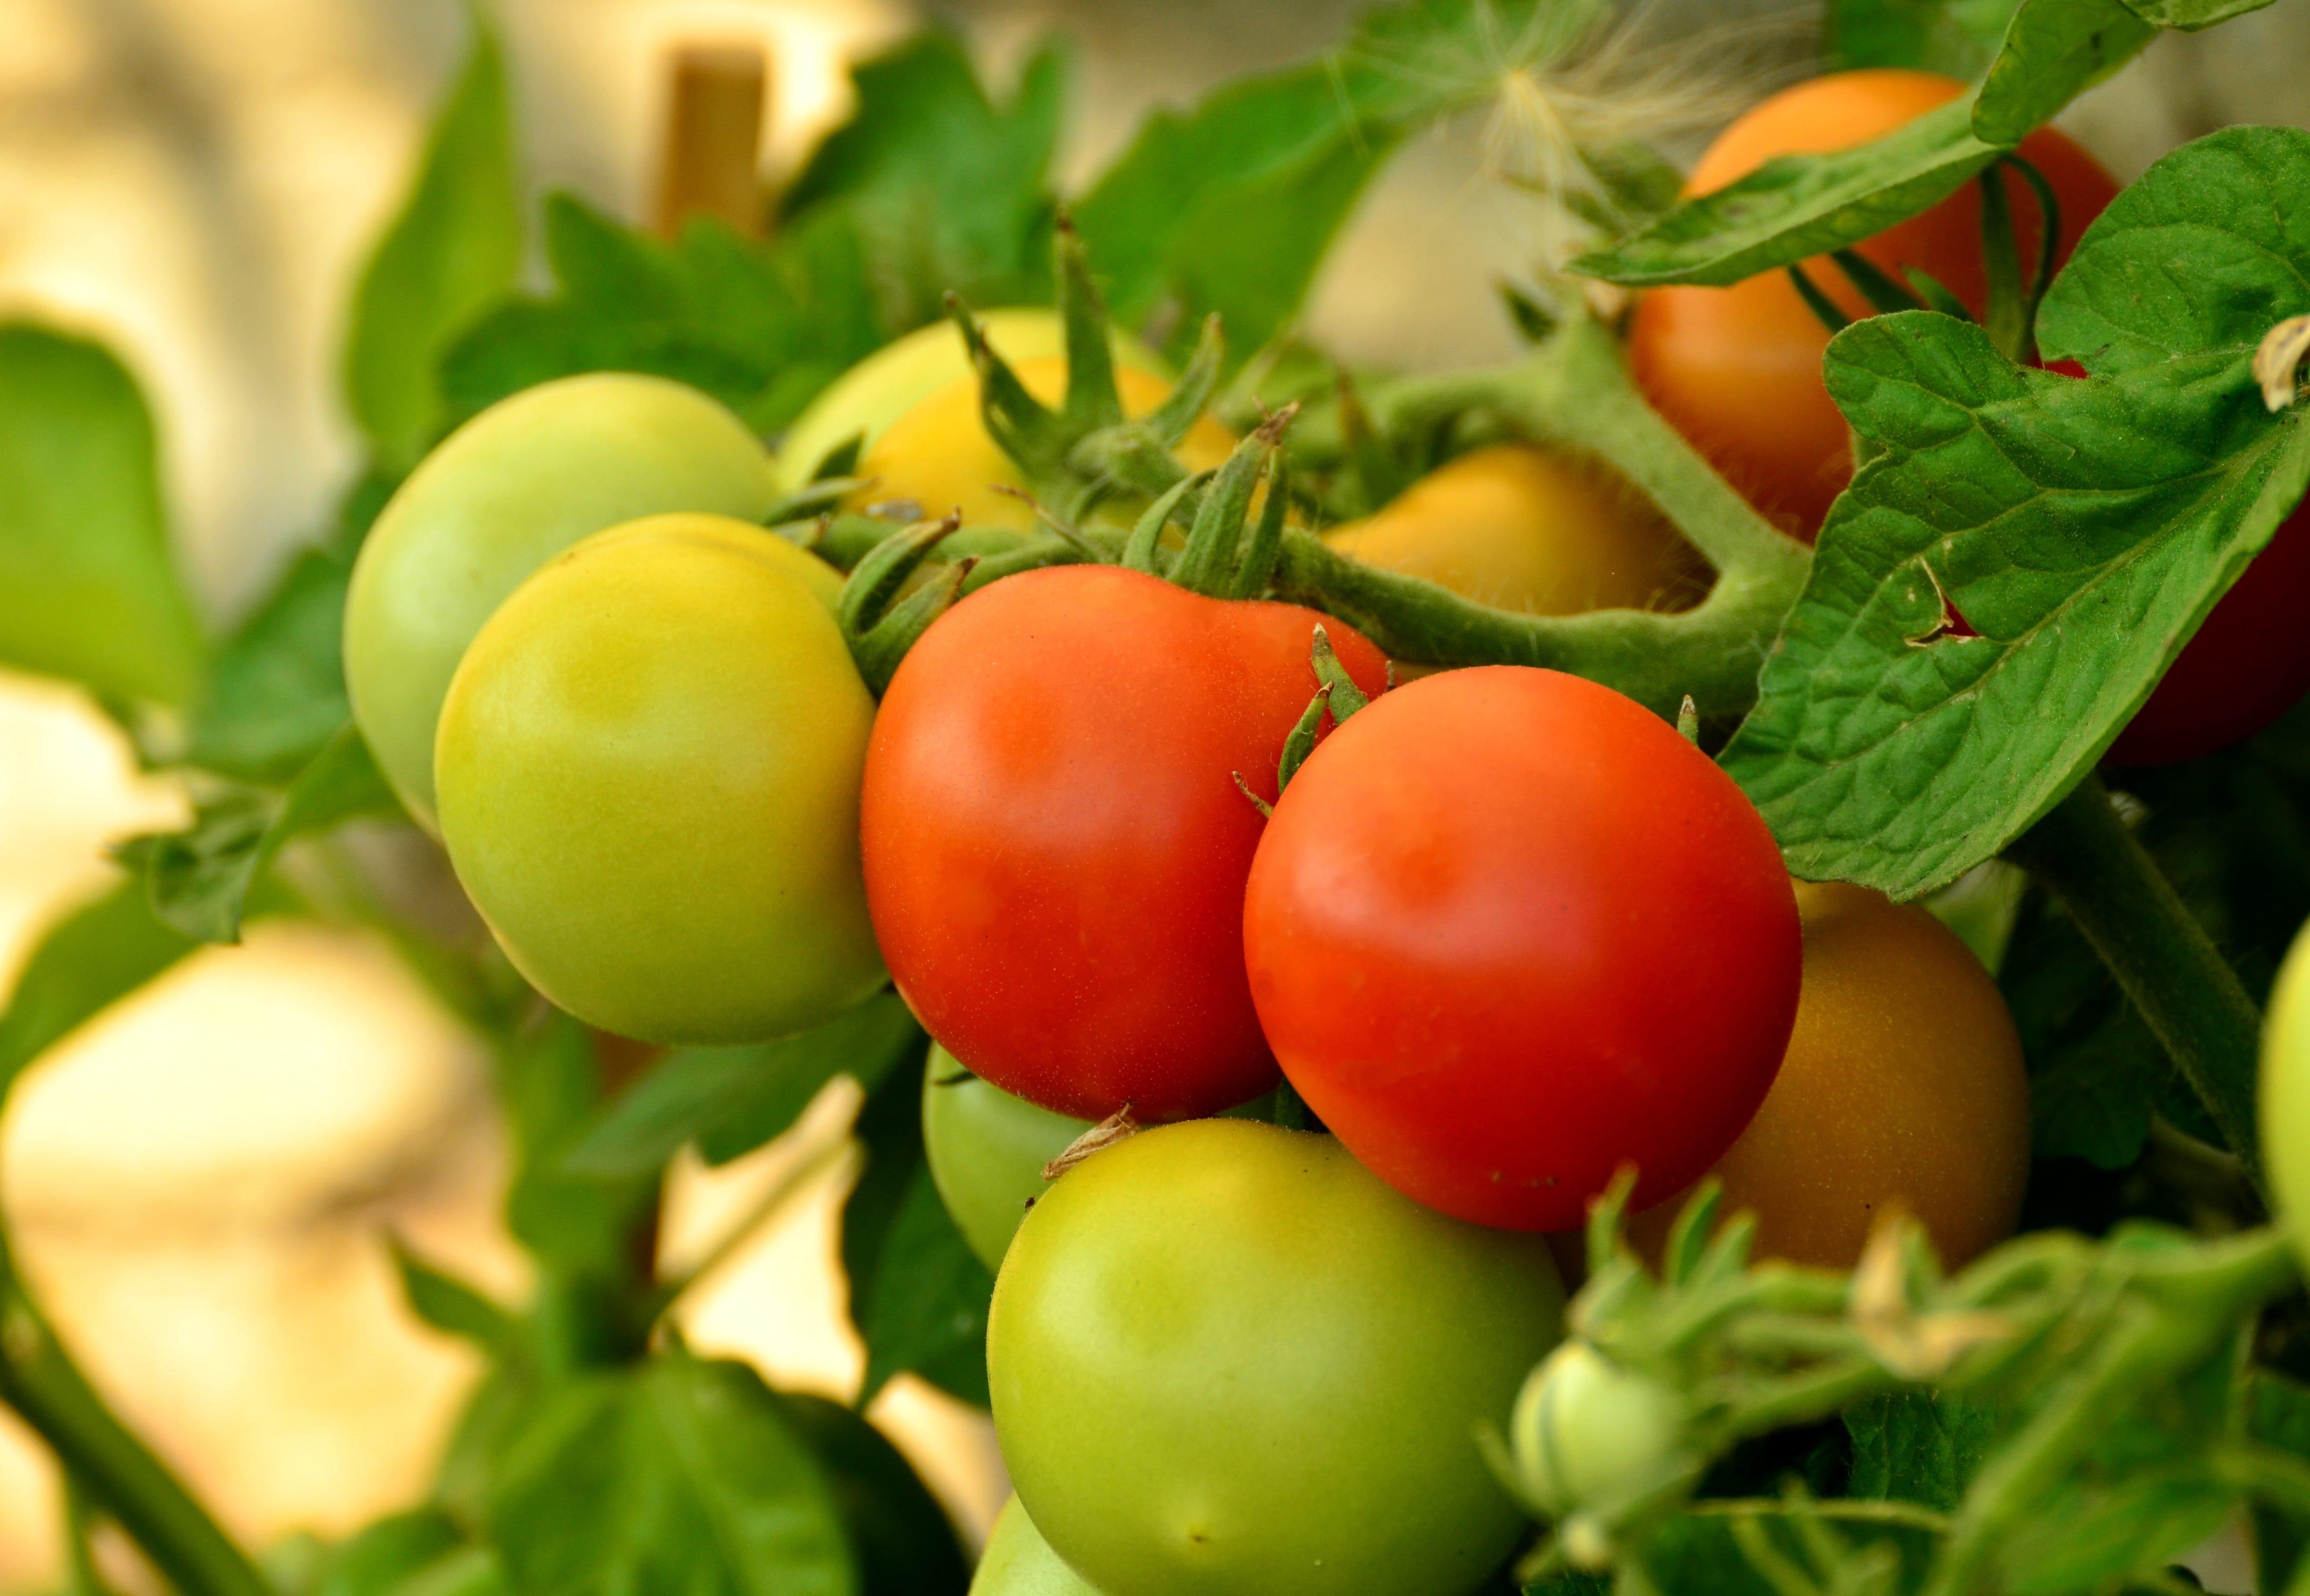 Although it is fun to try new cultivars, the bulk of your tomato planting should include varieties that have been tested at LSU AgCenter research stations and are proven producers here.